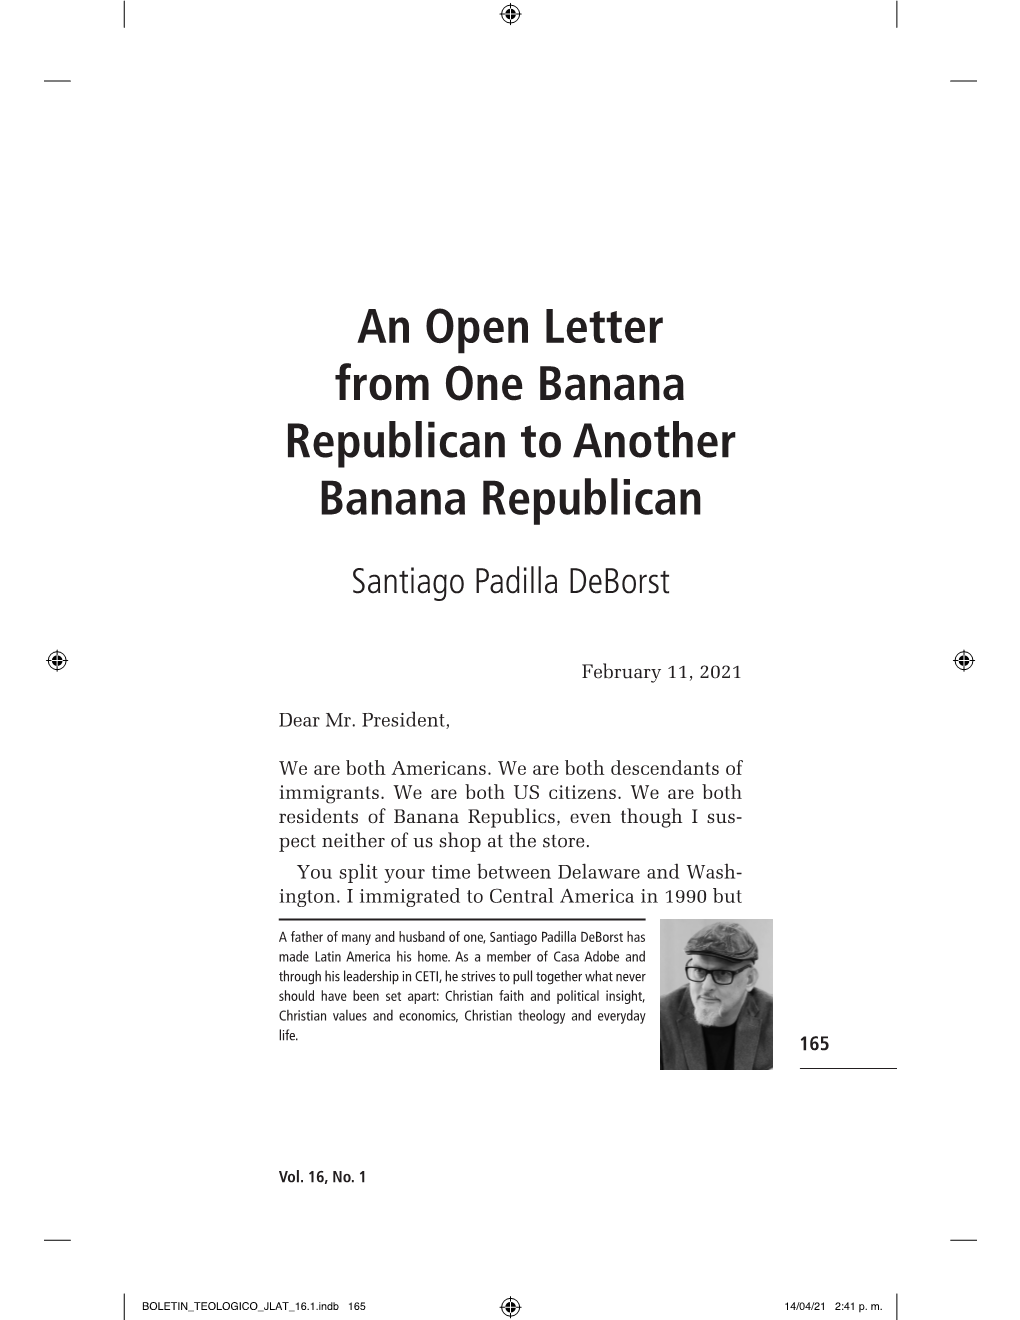 An Open Letter from One Banana Republican to Another Banana Republican